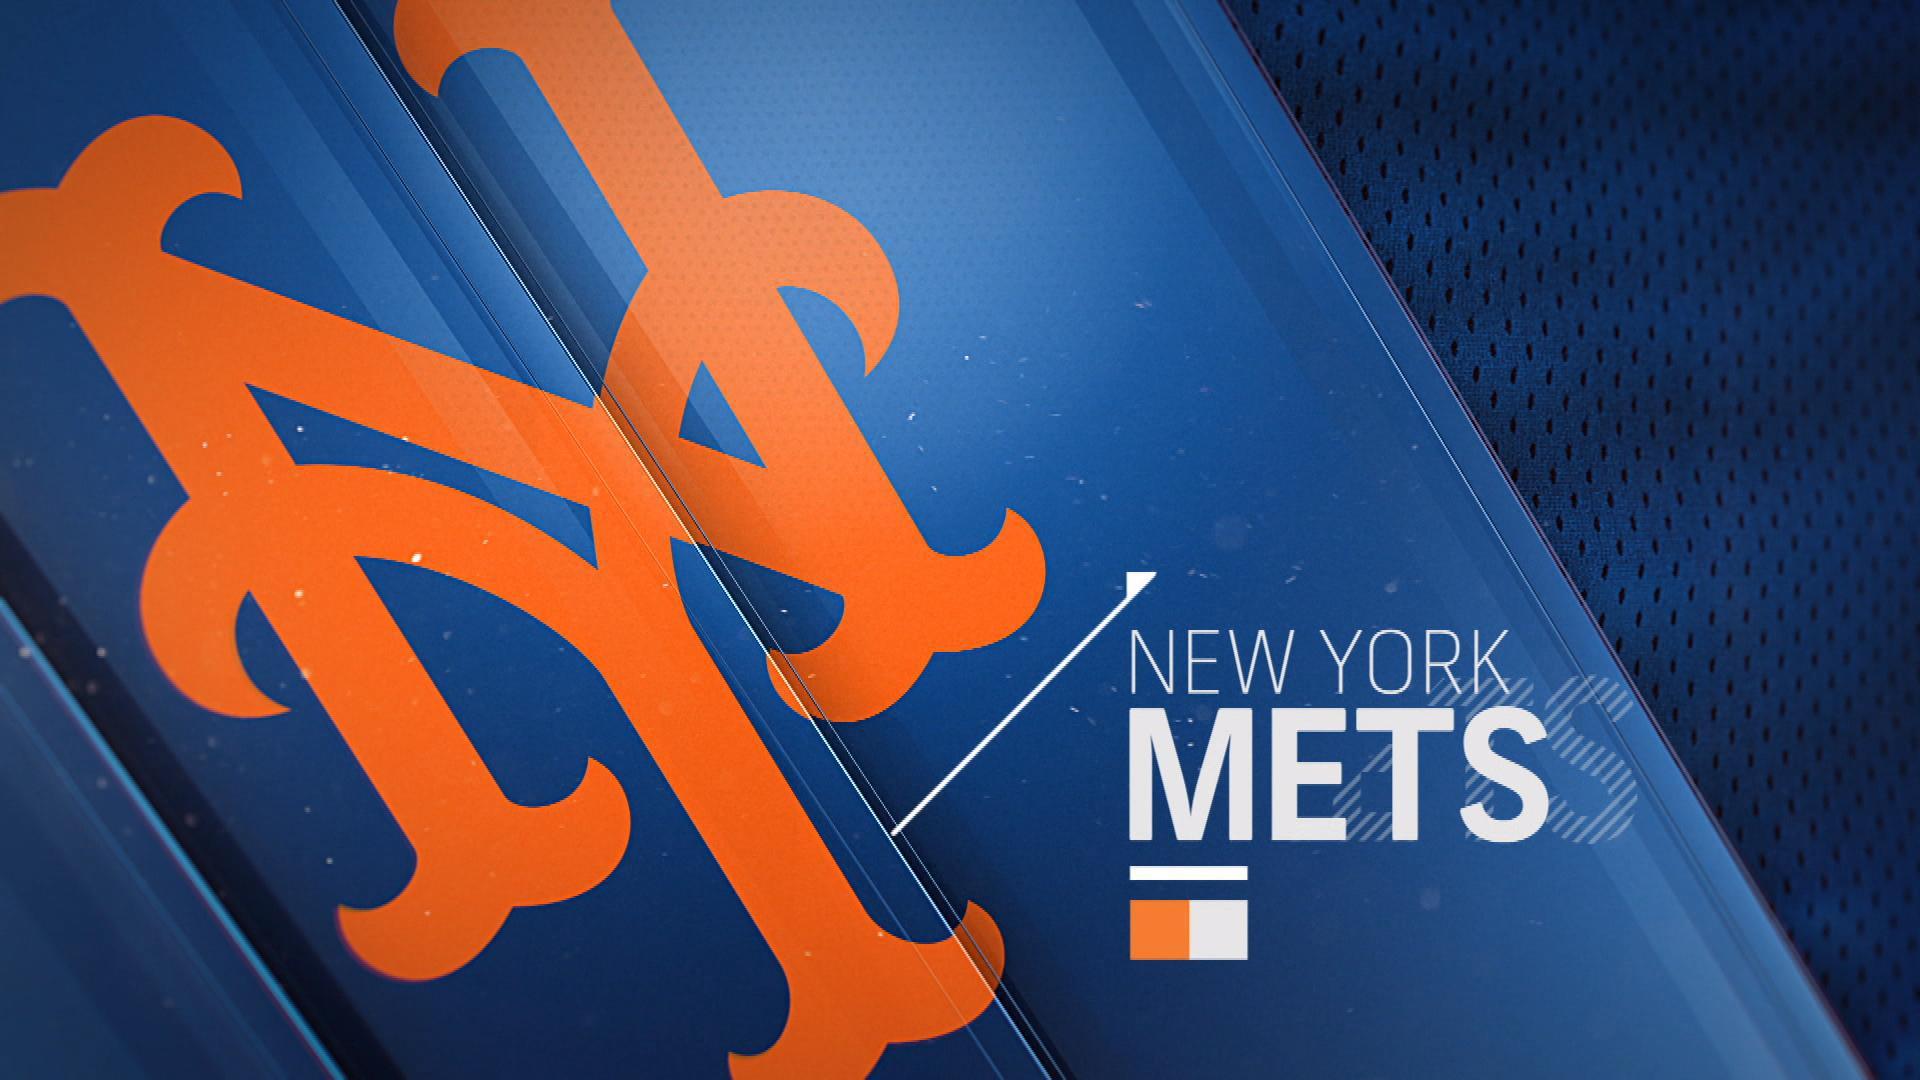 New York Mets Wallpaper Image Photo Picture Background